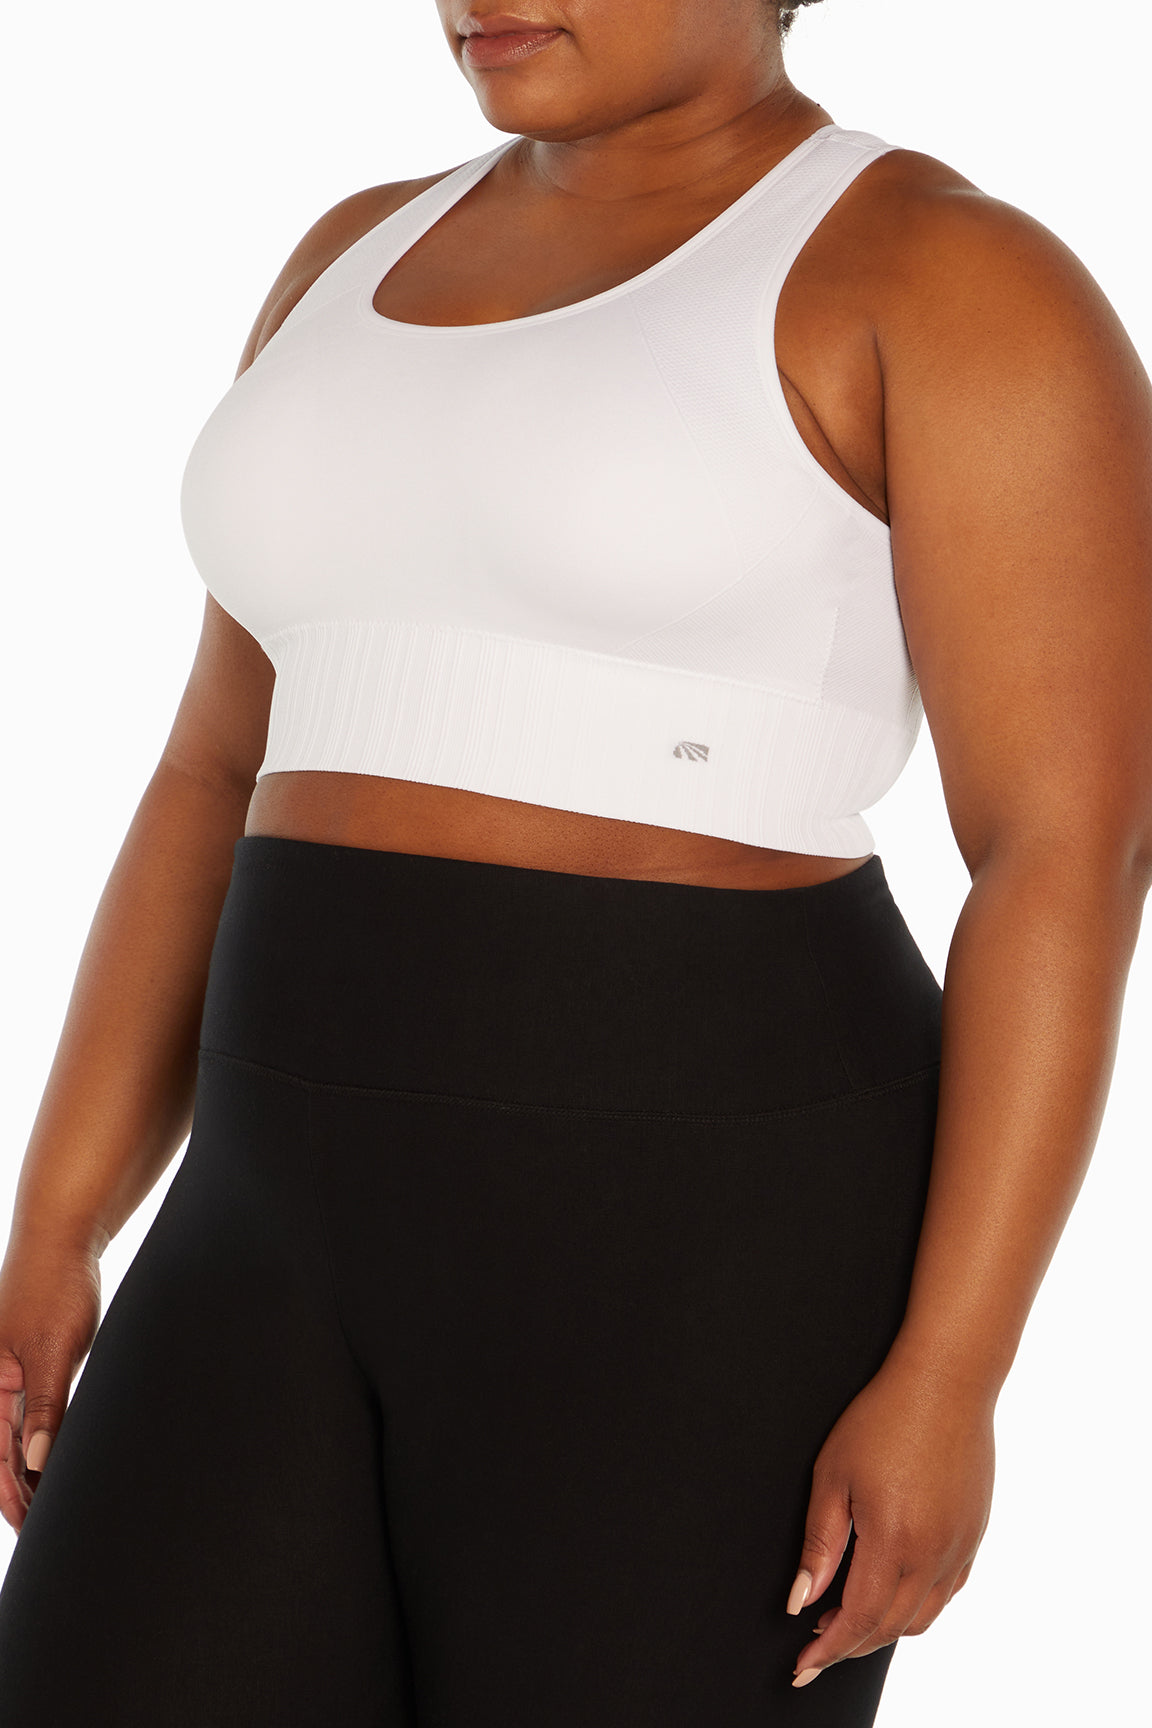 Bseka Clearance items!Plus Size Sports Bras For Women Lace